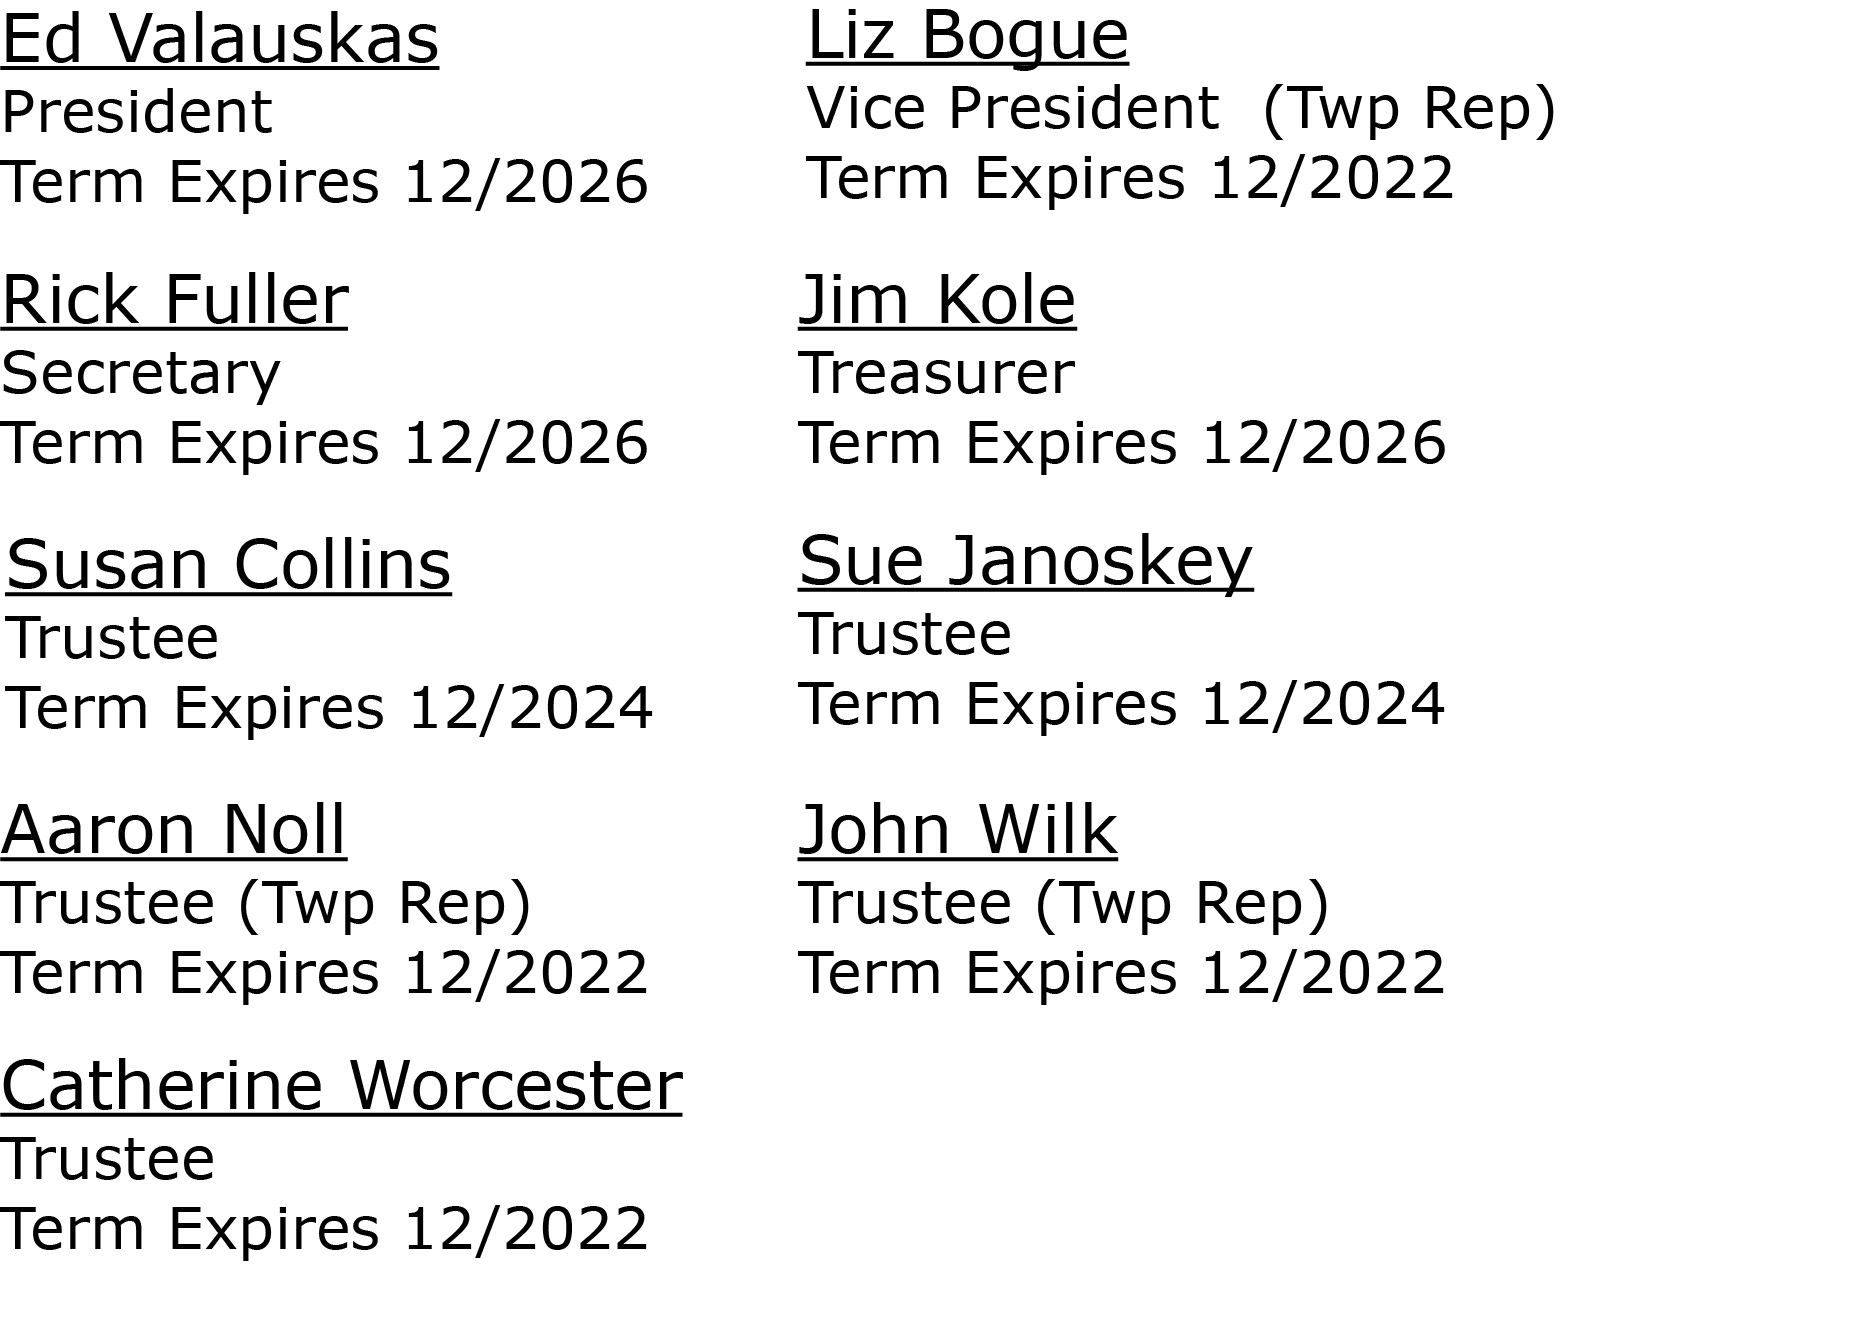 List of Board of Trustee Members, their roles and terms expiring. Click for PDF